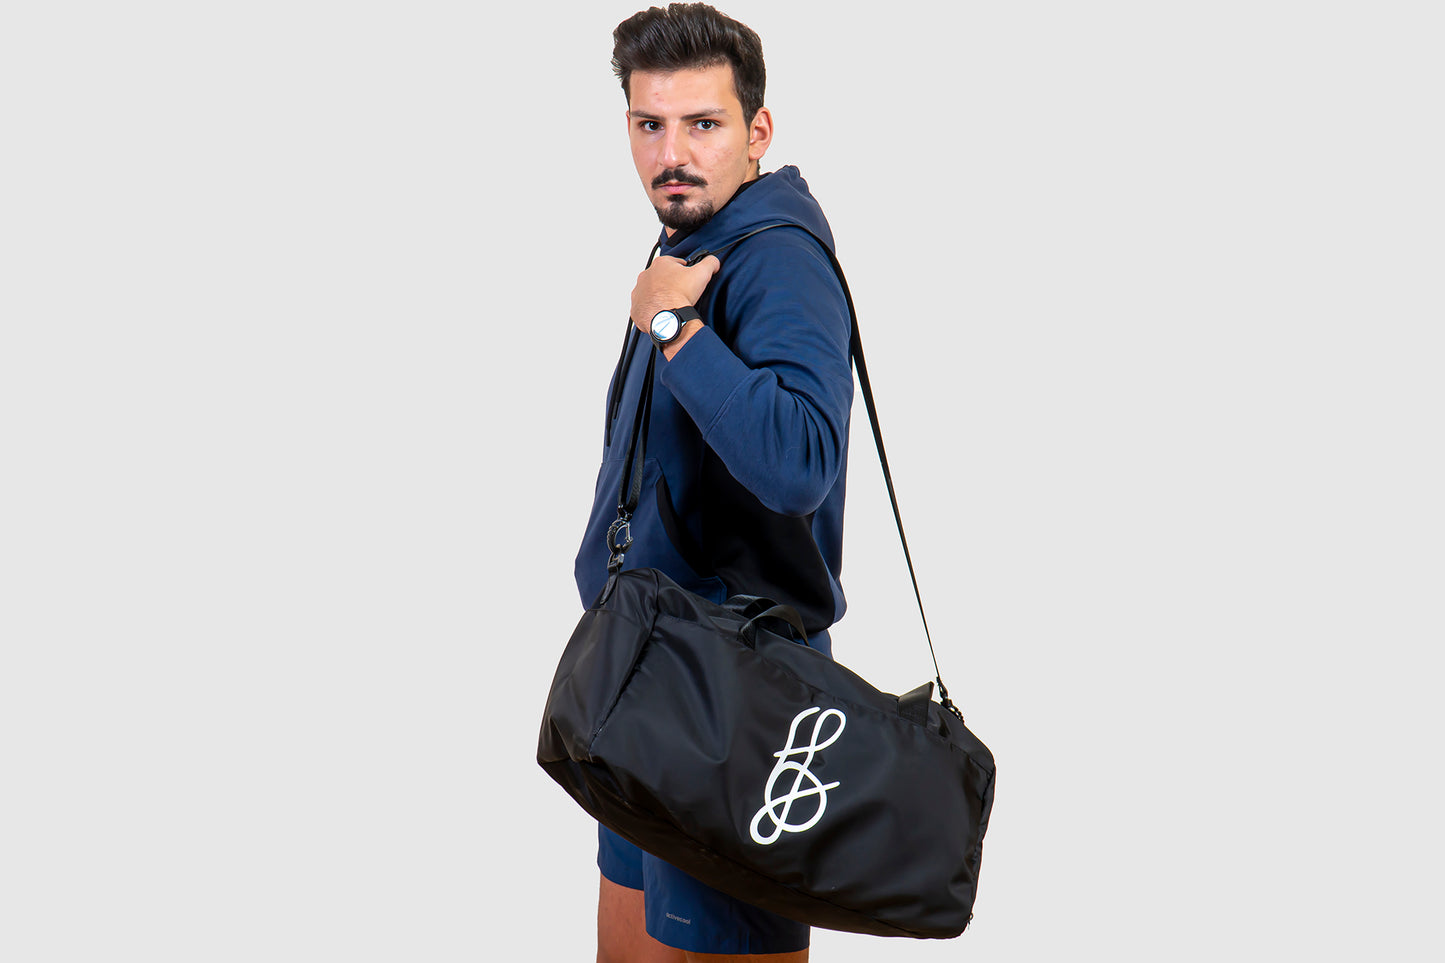 This gym duffle bag is a fashionable bag for boys and men